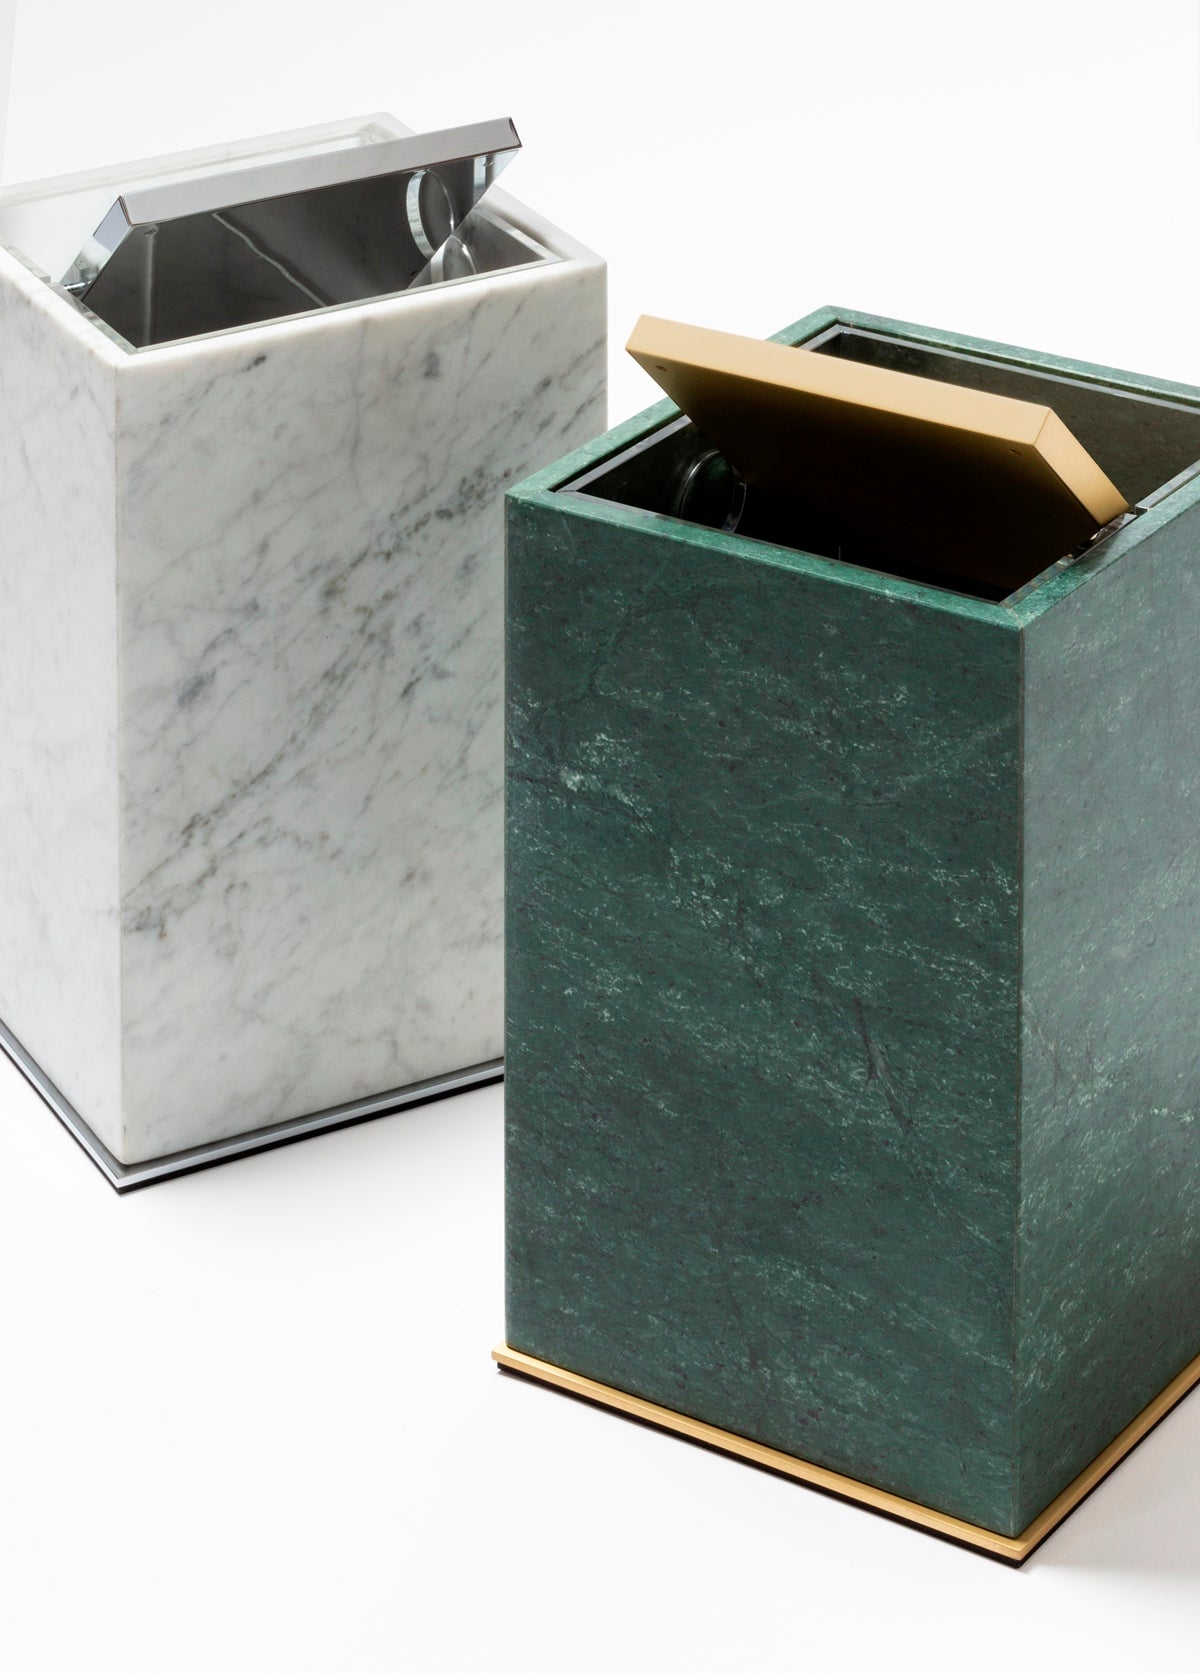 Giobagnara Positano Square Marble Bin | Brass base frame and plexiglass inner structure | Non-slip waterproof rubber base | Explore Luxury Home Accessories at 2Jour Concierge, #1 luxury high-end gift & lifestyle shop